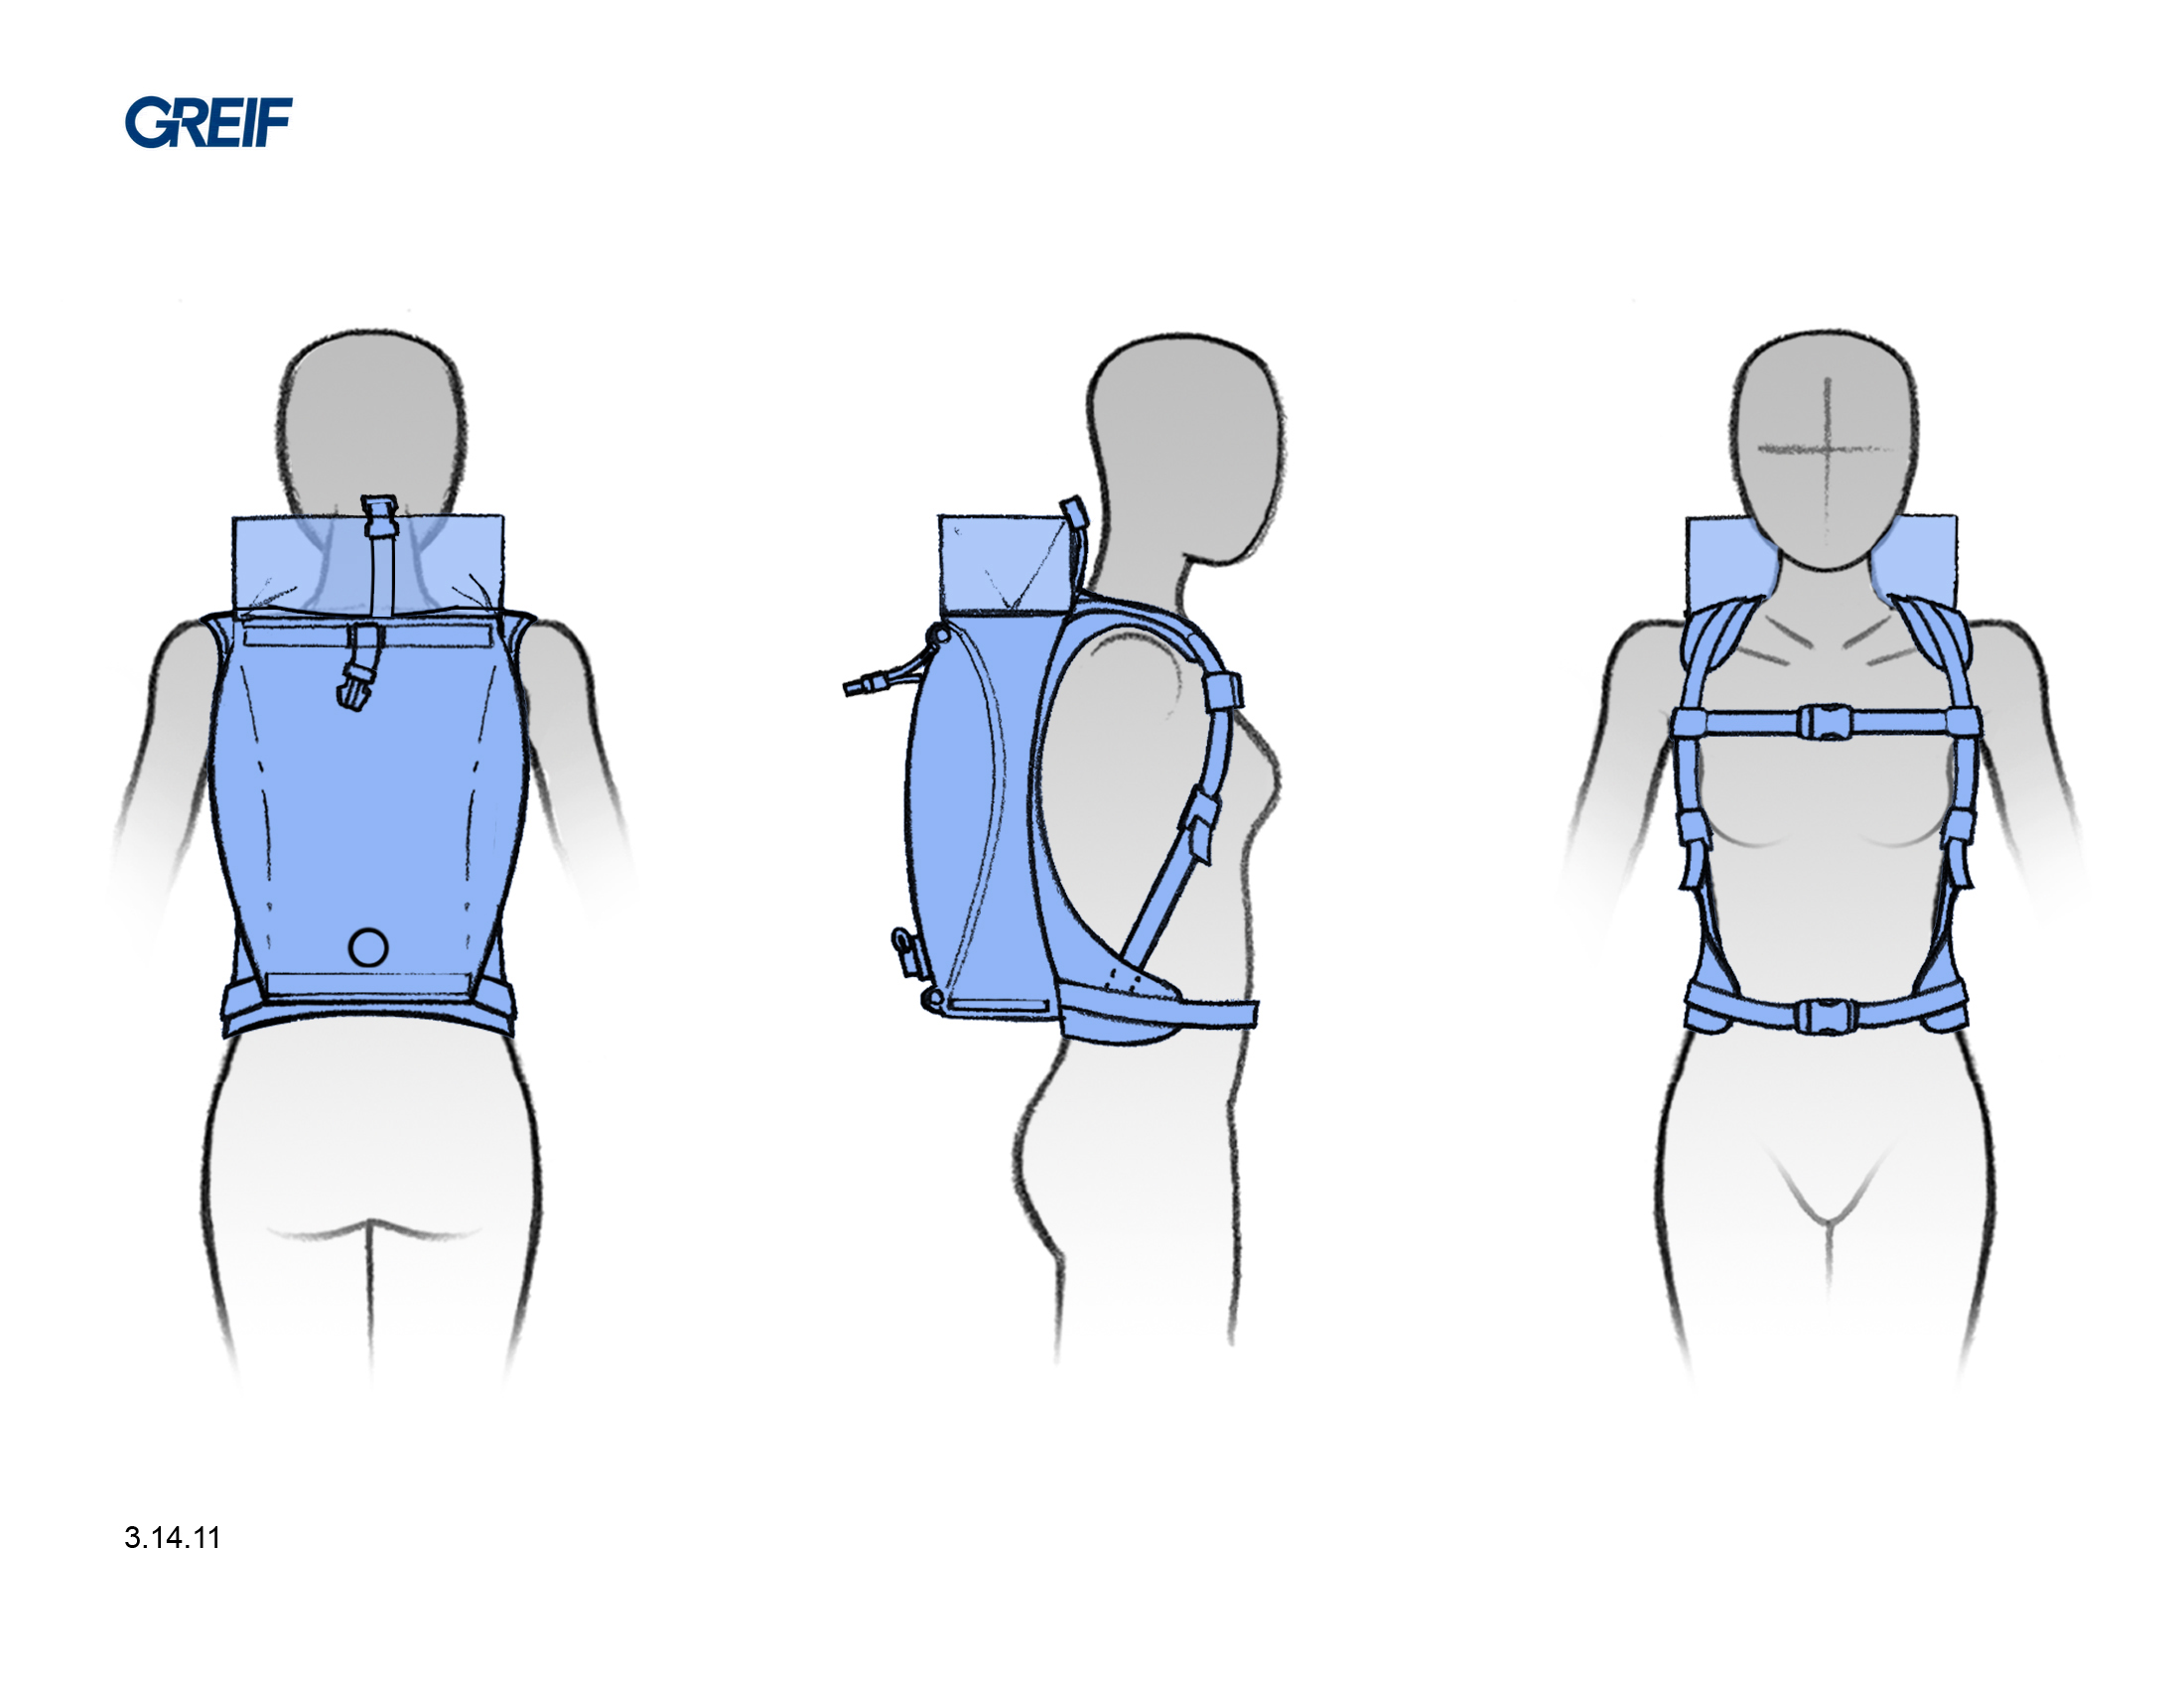 Collapsible Backpack for Water | Nottingham Spirk Design Collaborative